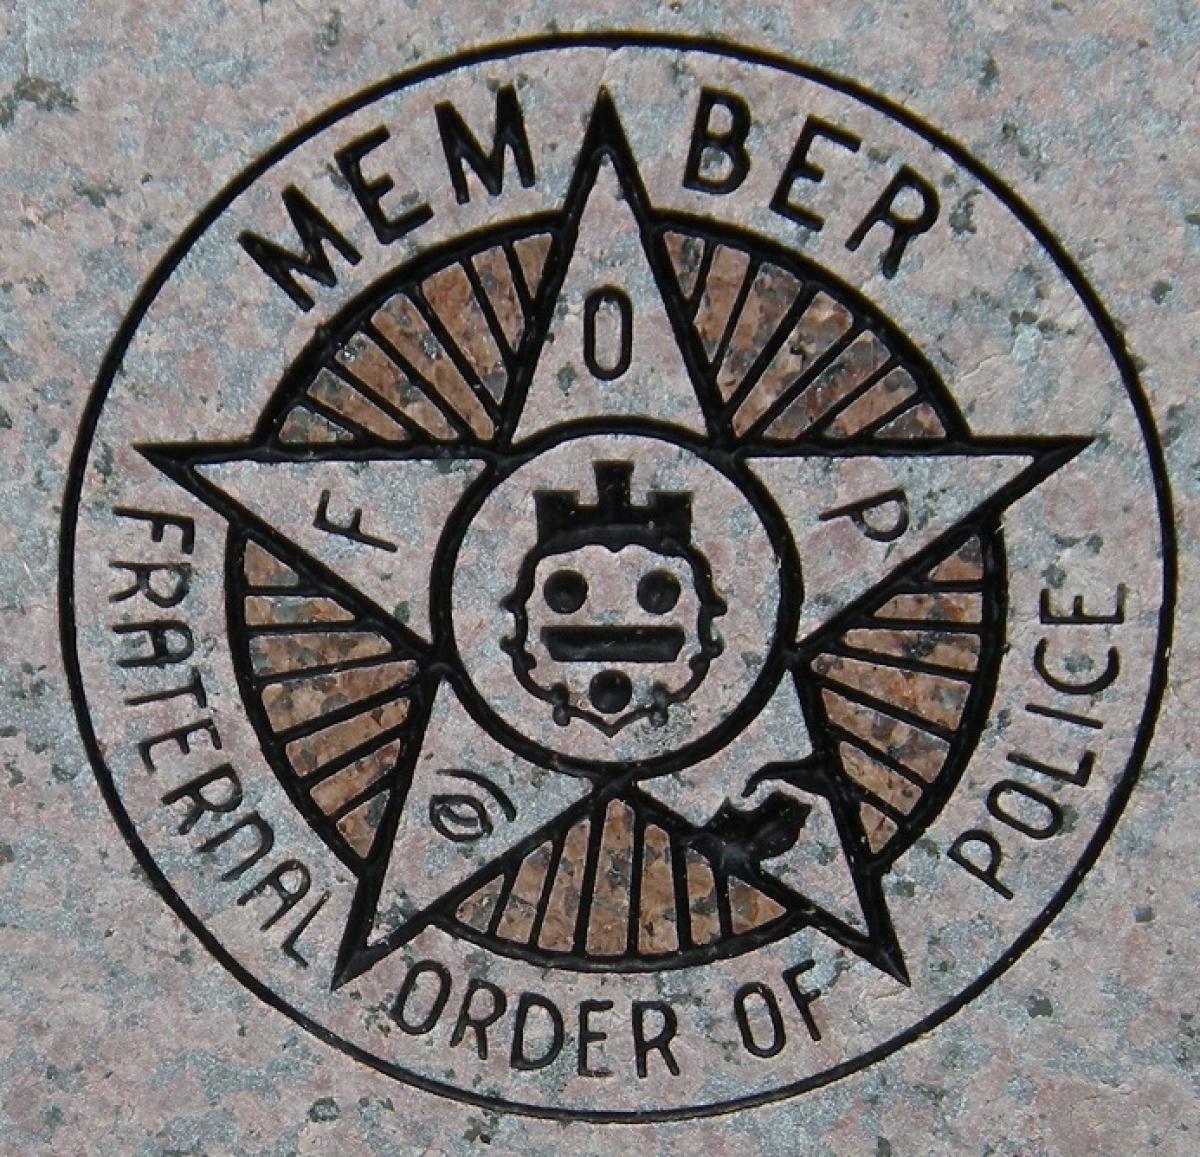 OK, Grove, Headstone Symbols and Meanings, Fraternal Order of Police (FOP)